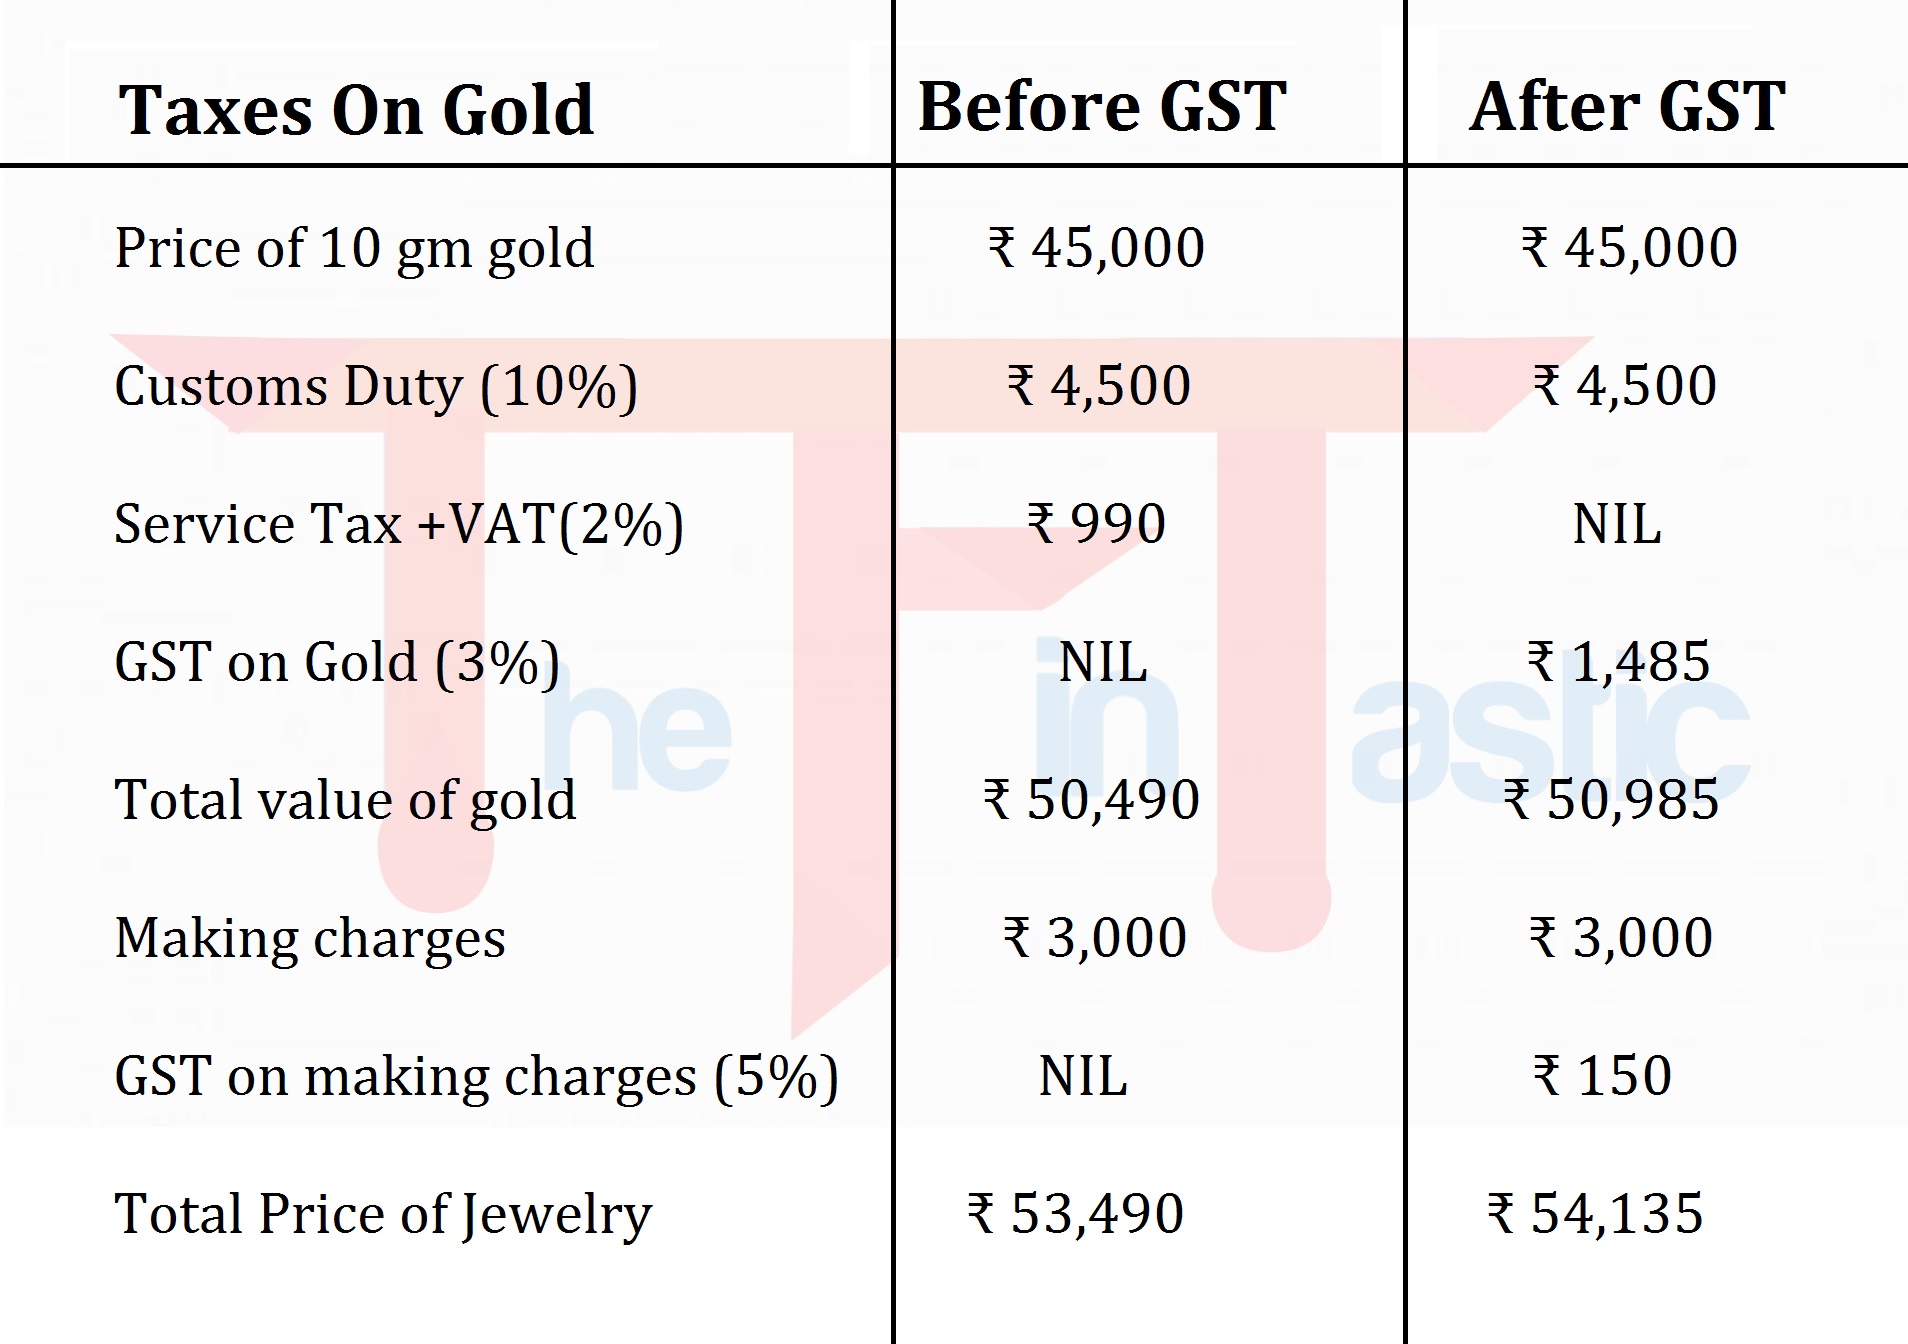 GST (Goods & Services Tax) on Gold in 2021